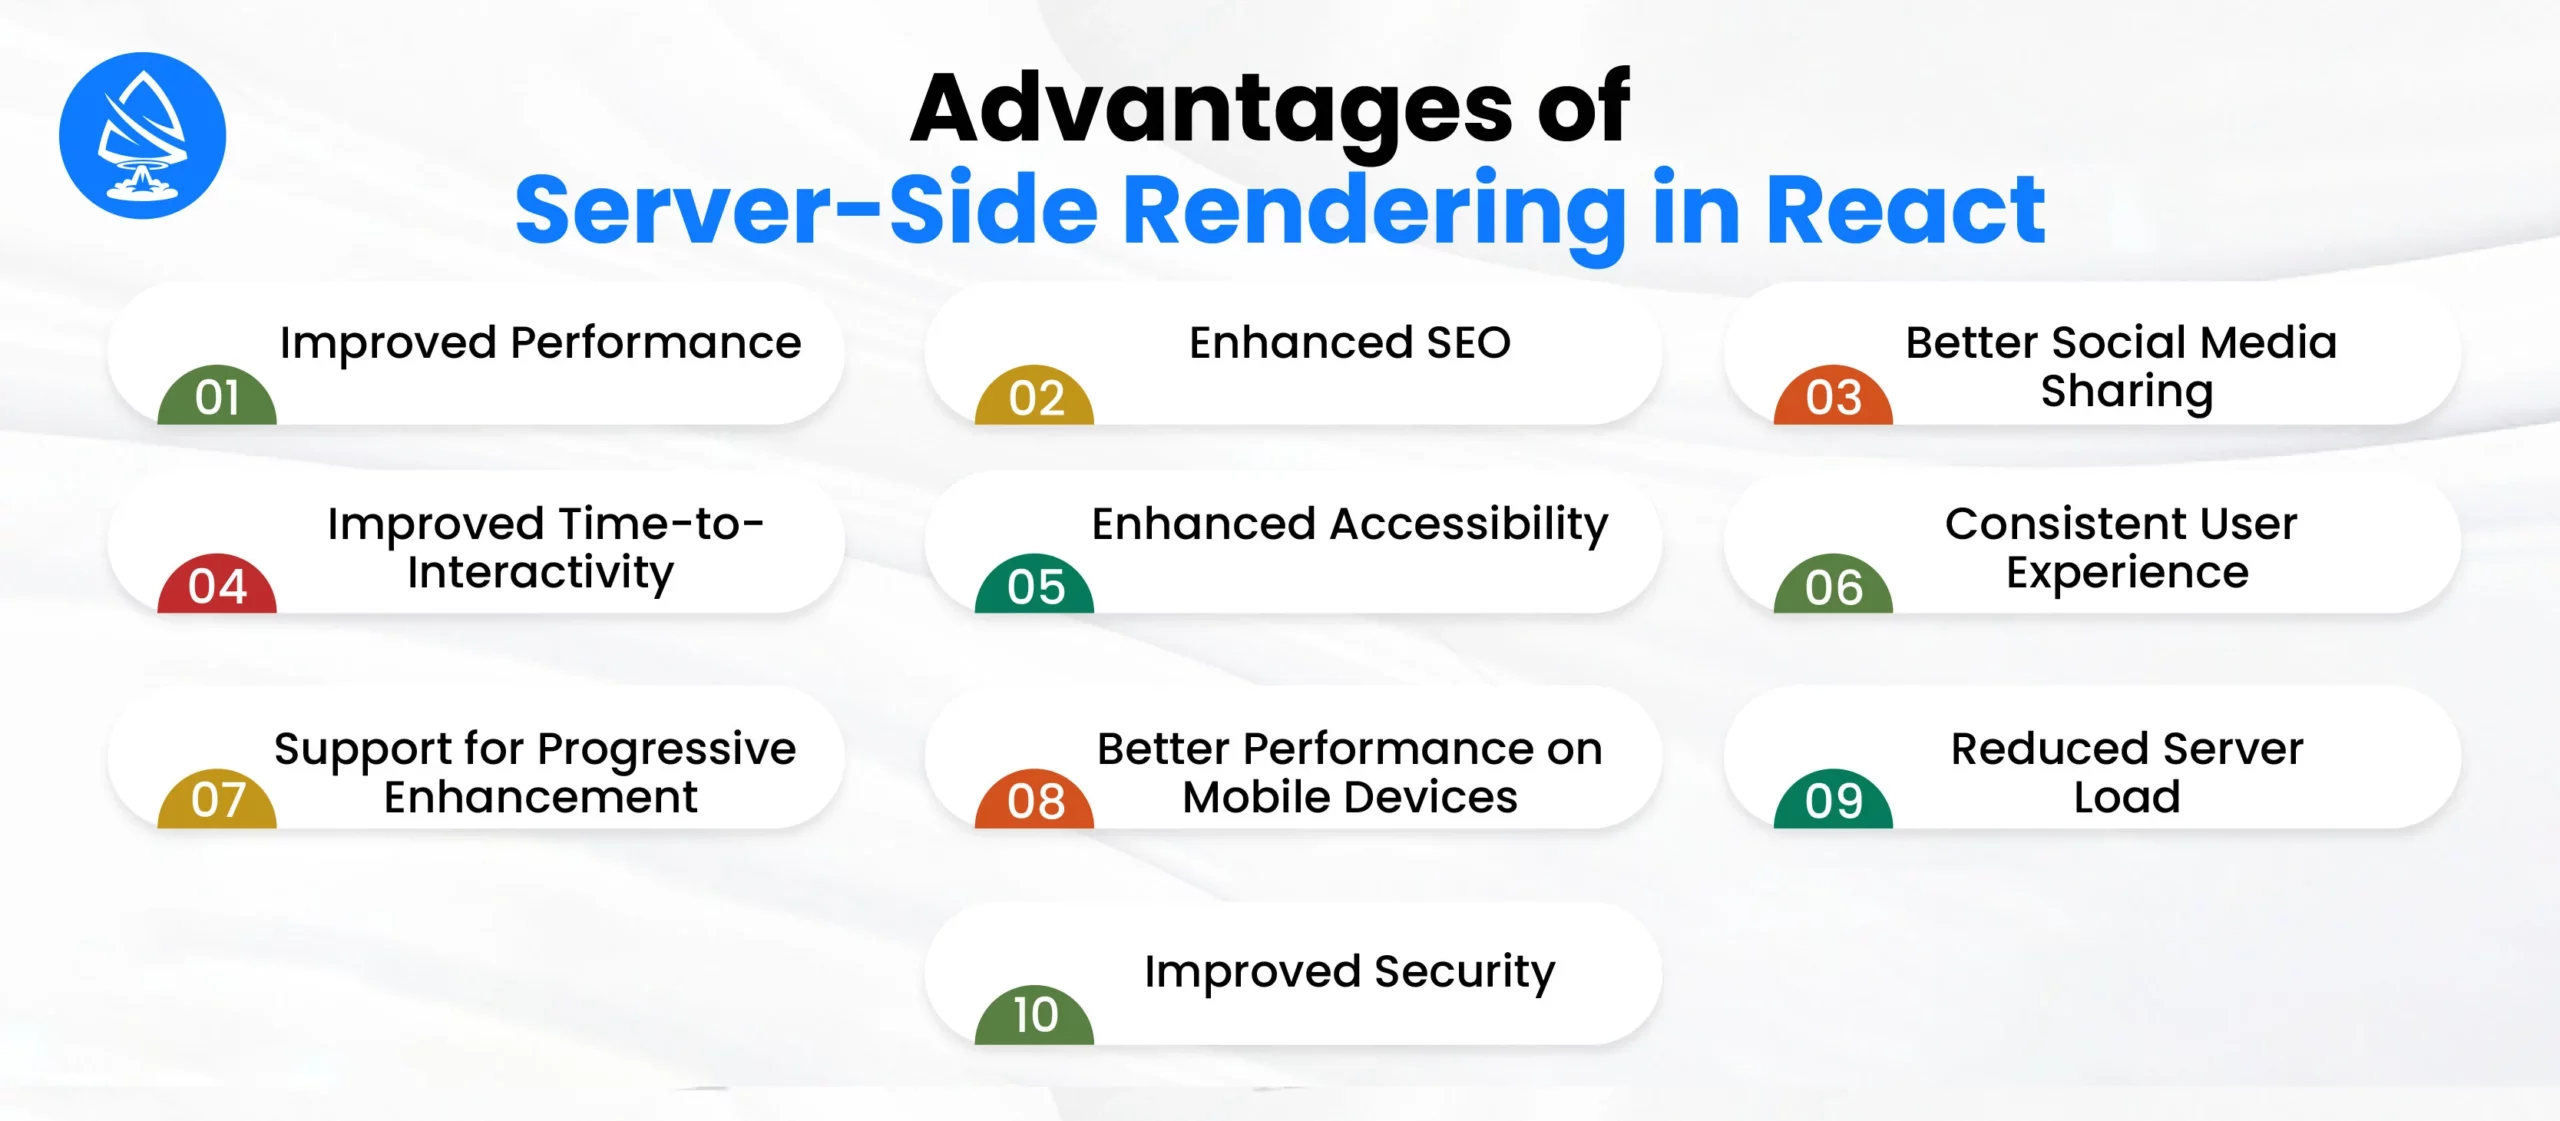 Advantages of Server-Side Rendering (SSR) in React